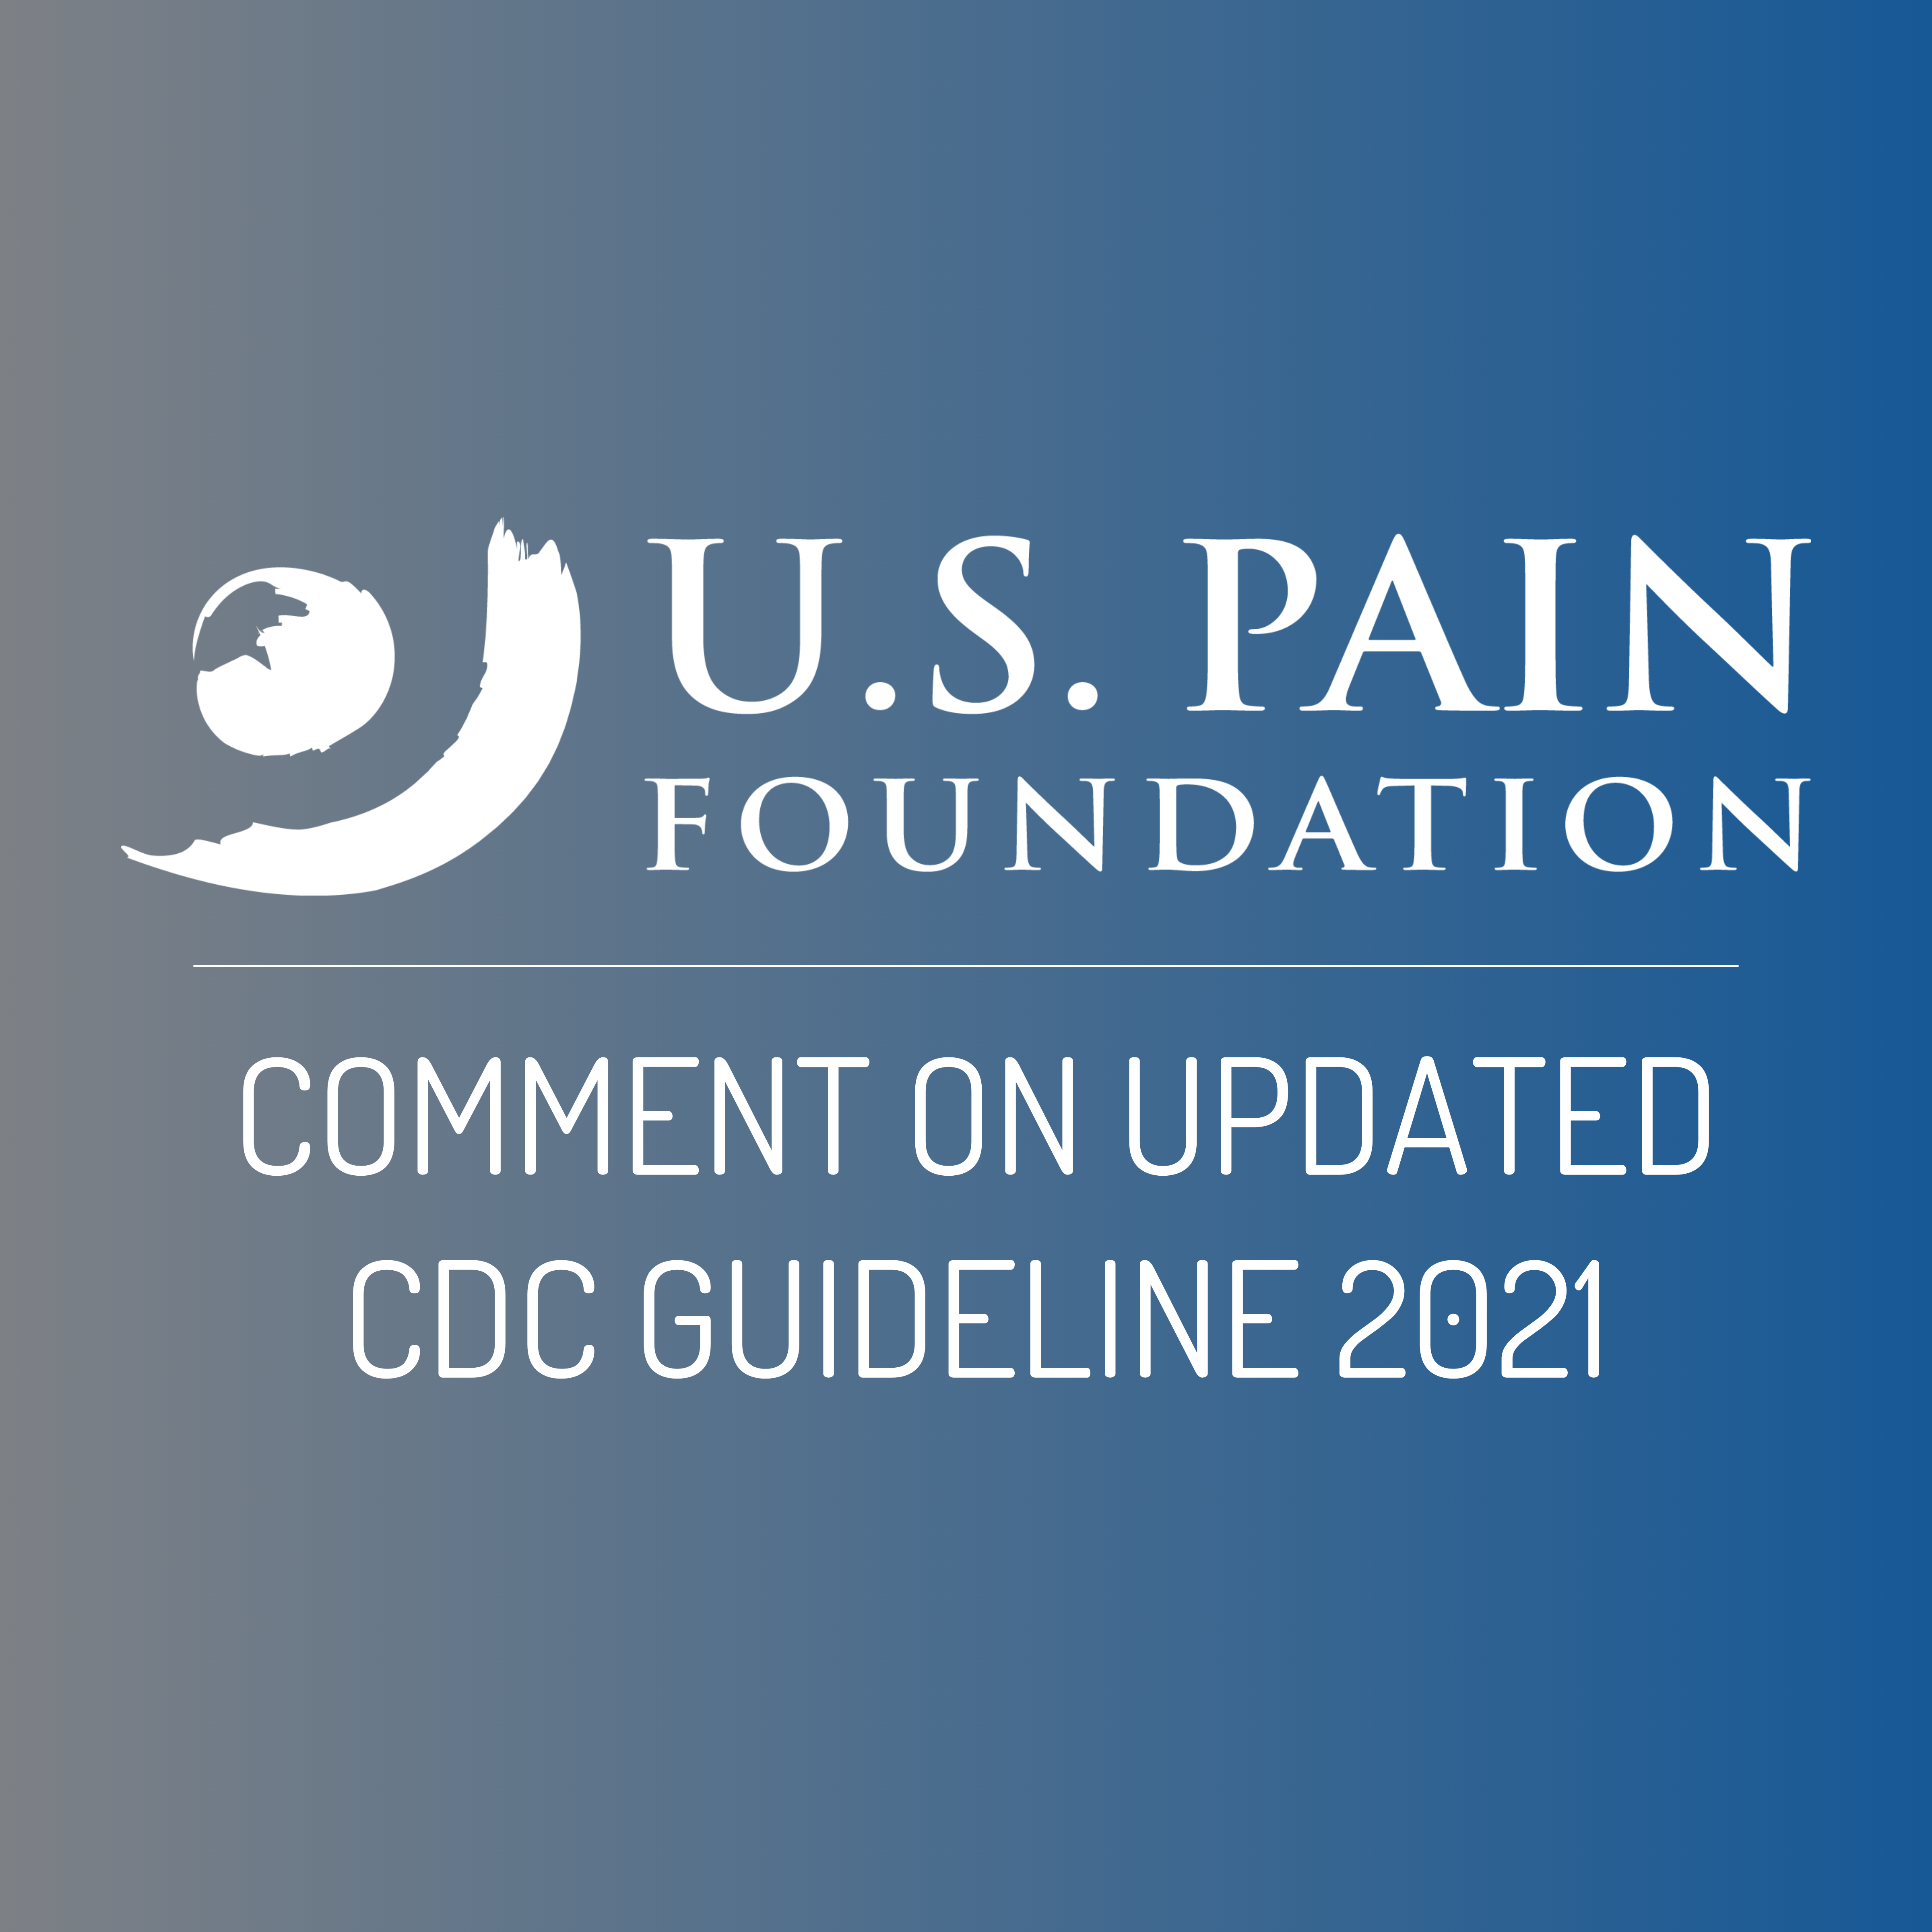 U.S. Pain Foundation’s  Comment on Updated CDC Guideline 2021